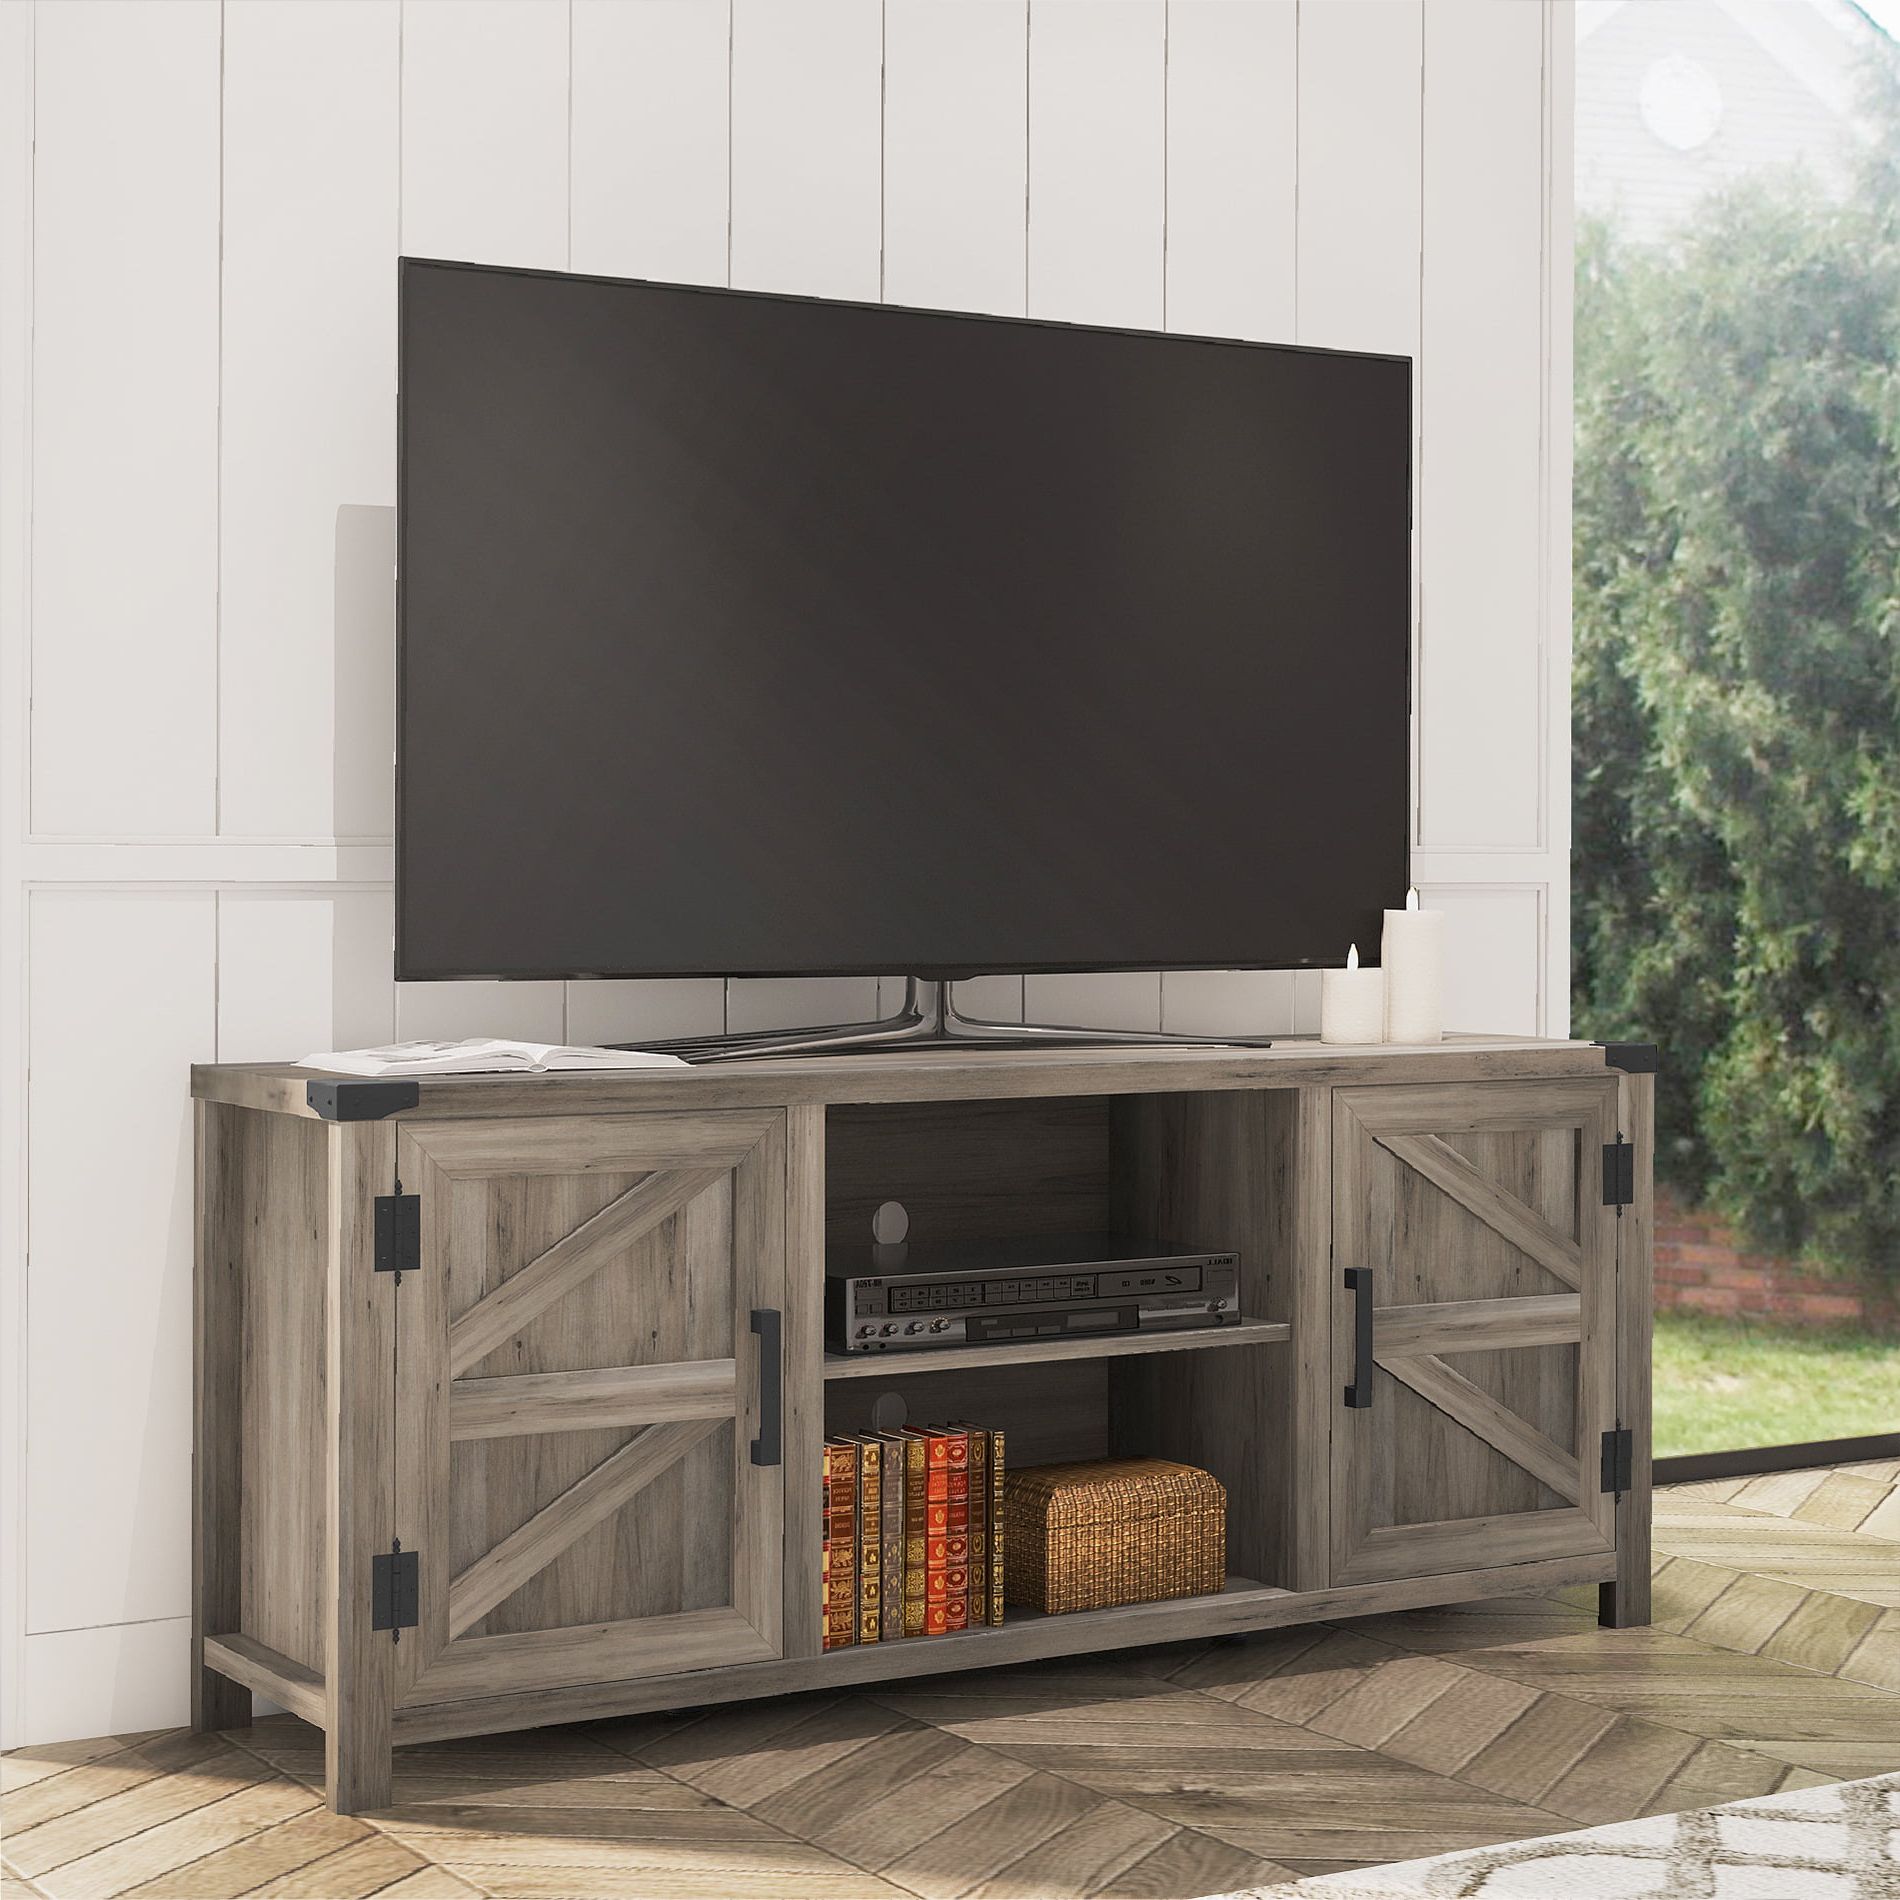 Recent Farmhouse Media Entertainment Centers Intended For Fitueyes Farmhouse Barn Door Wood Tv Stands For 70'' Flat Screen, Media (View 7 of 15)